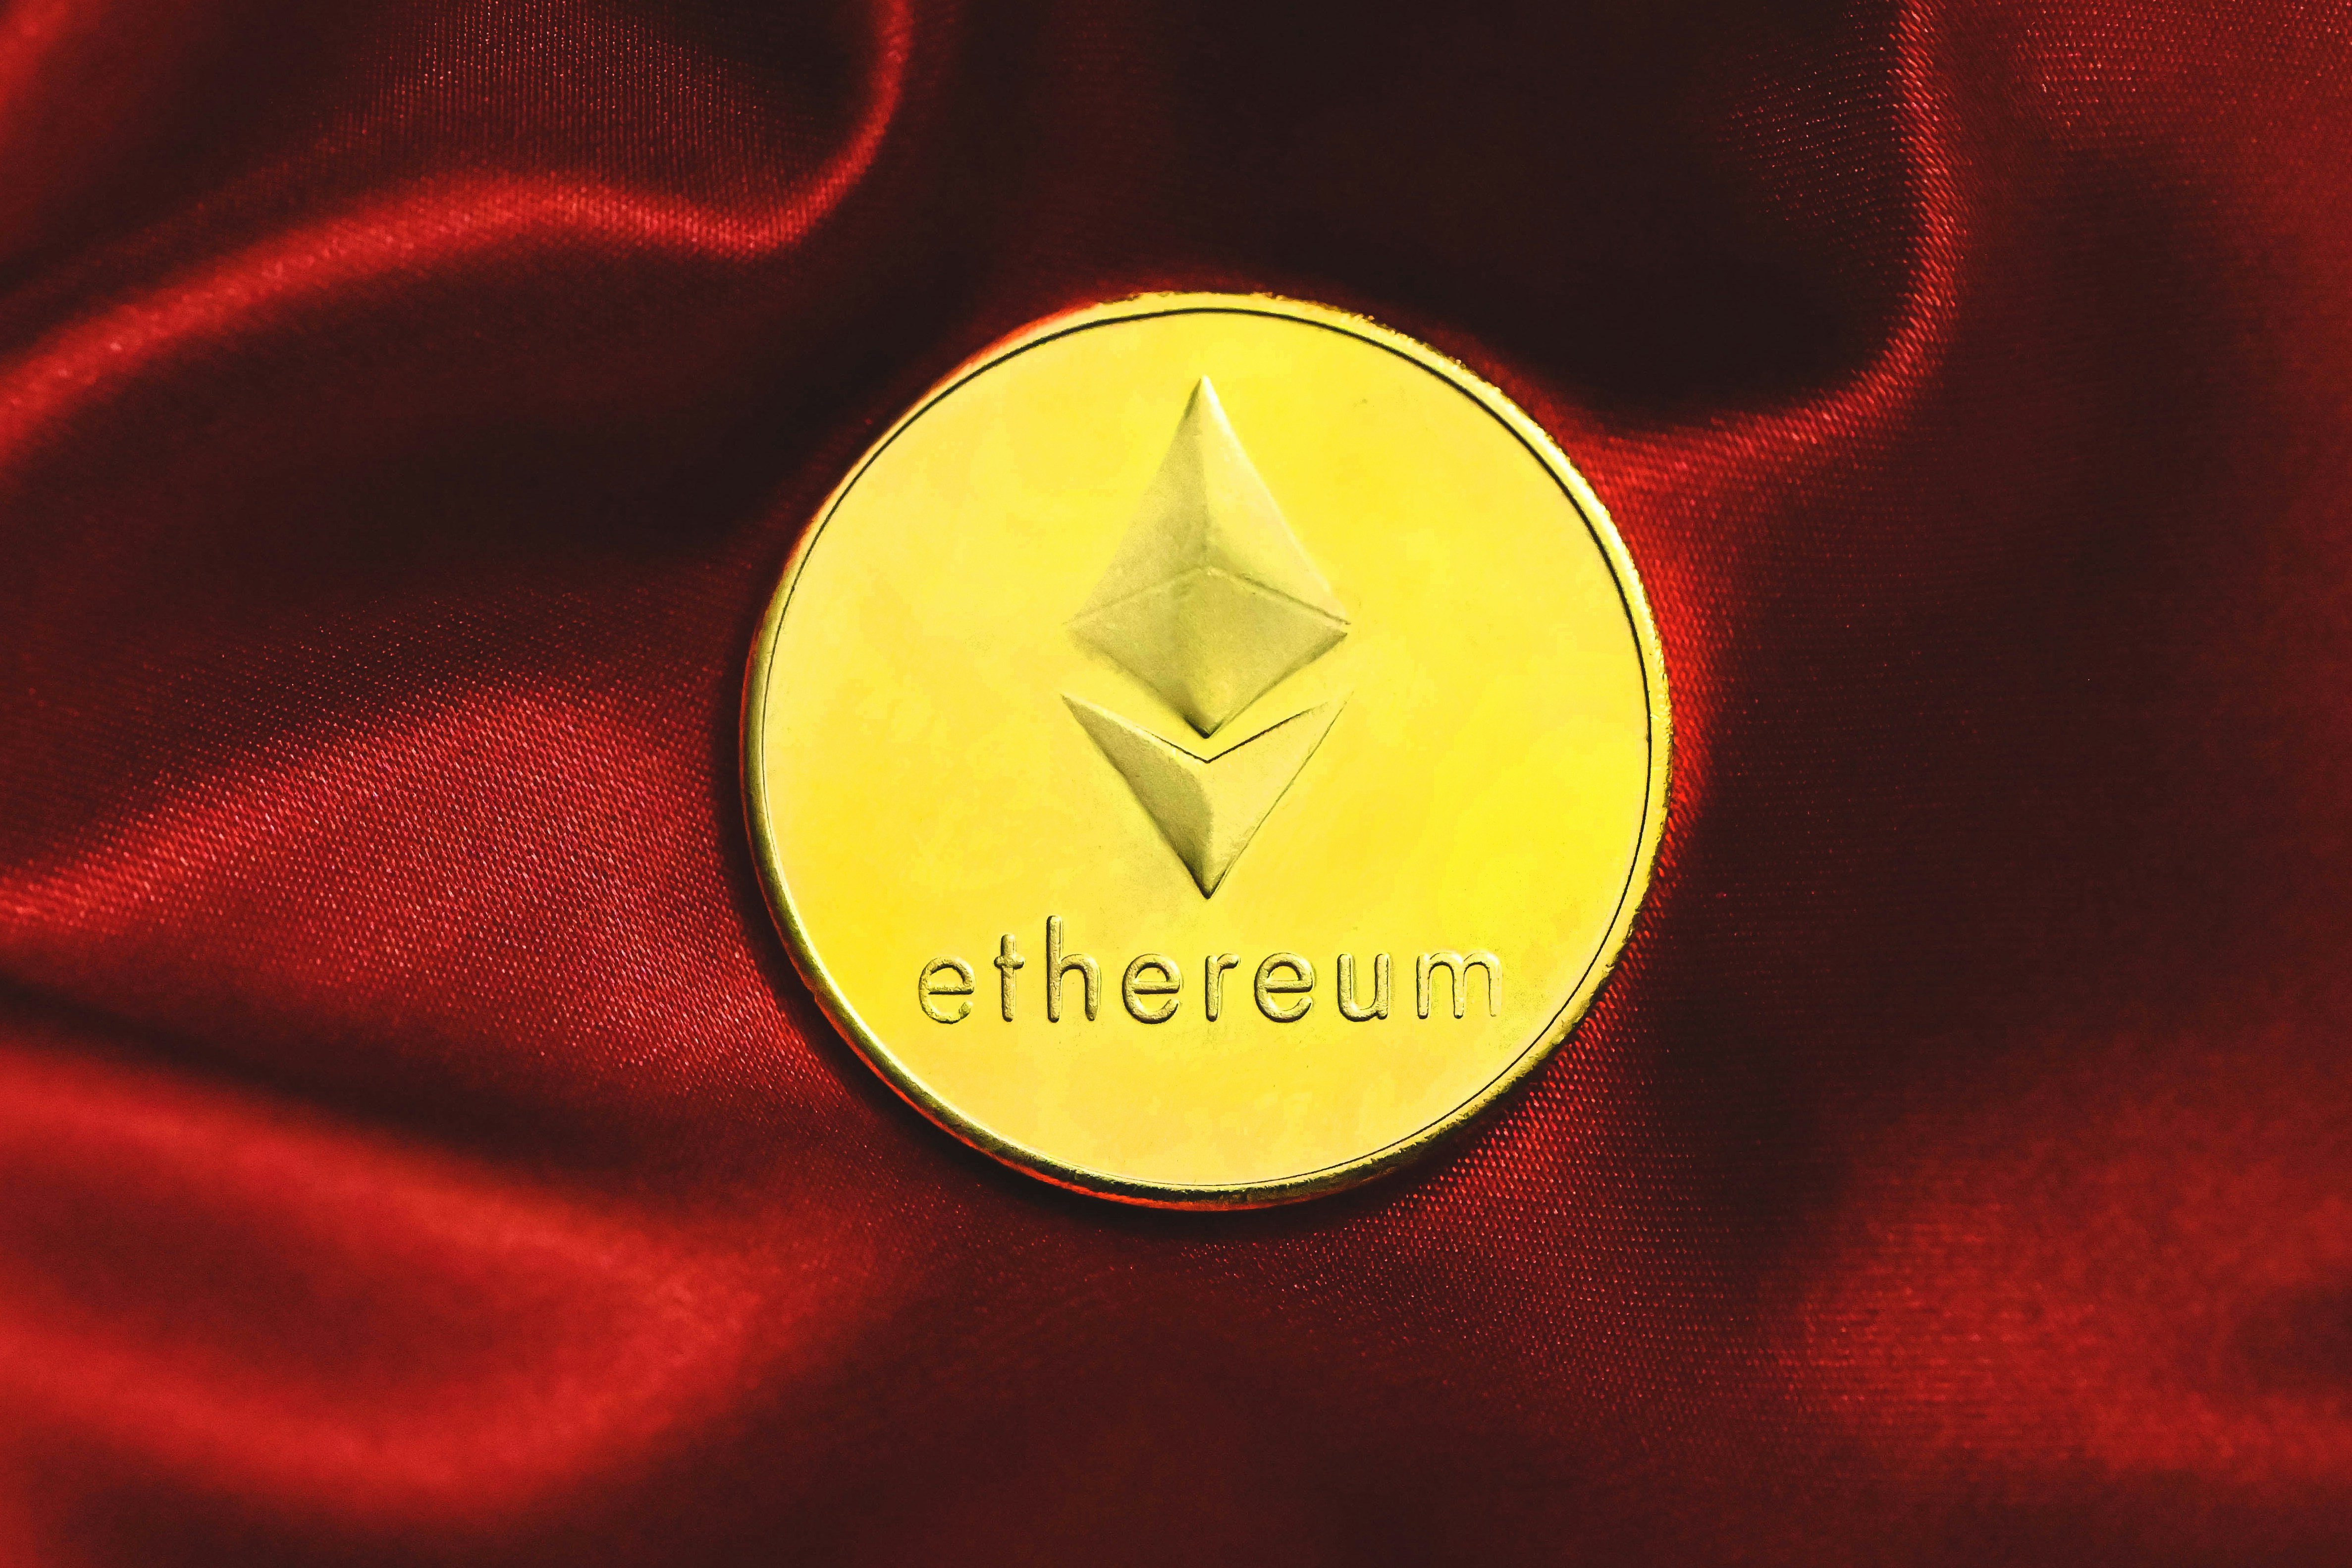 An Ethereum coin on red fabric